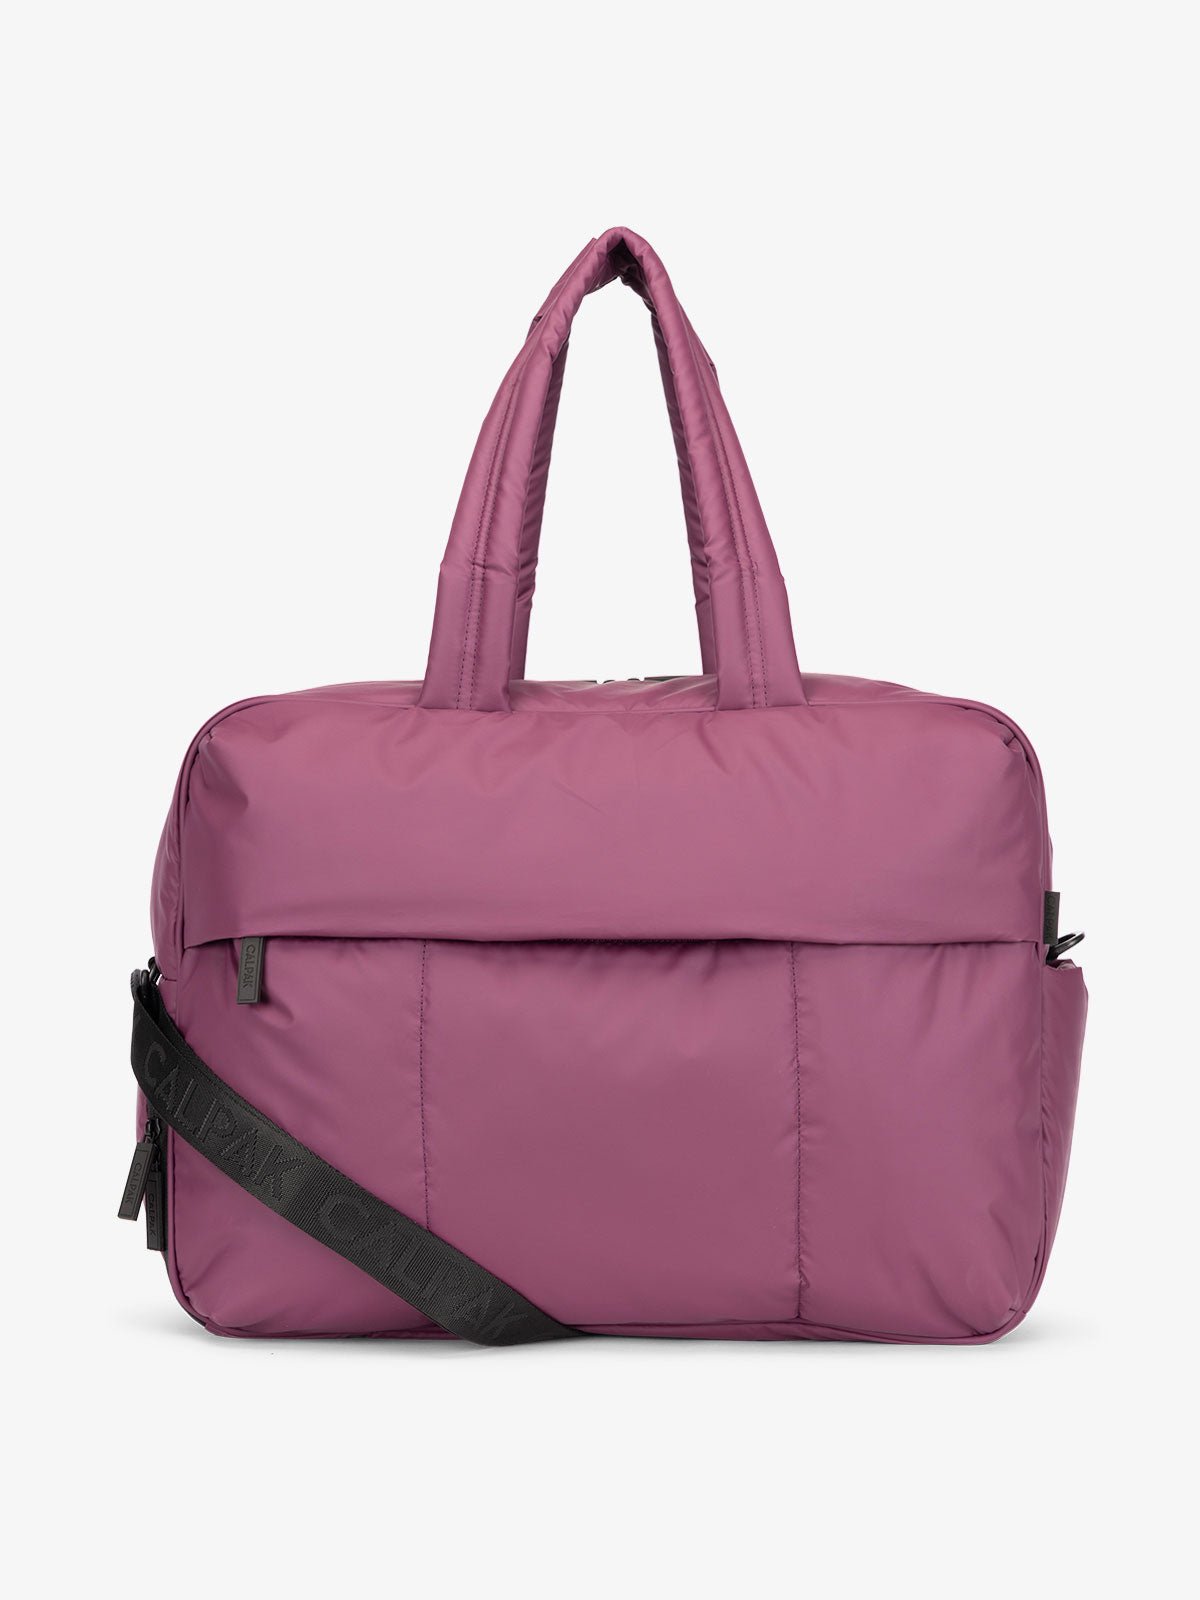 CALPAK Luka large duffle bag with detachable strap and zippered front pocket in purple plum